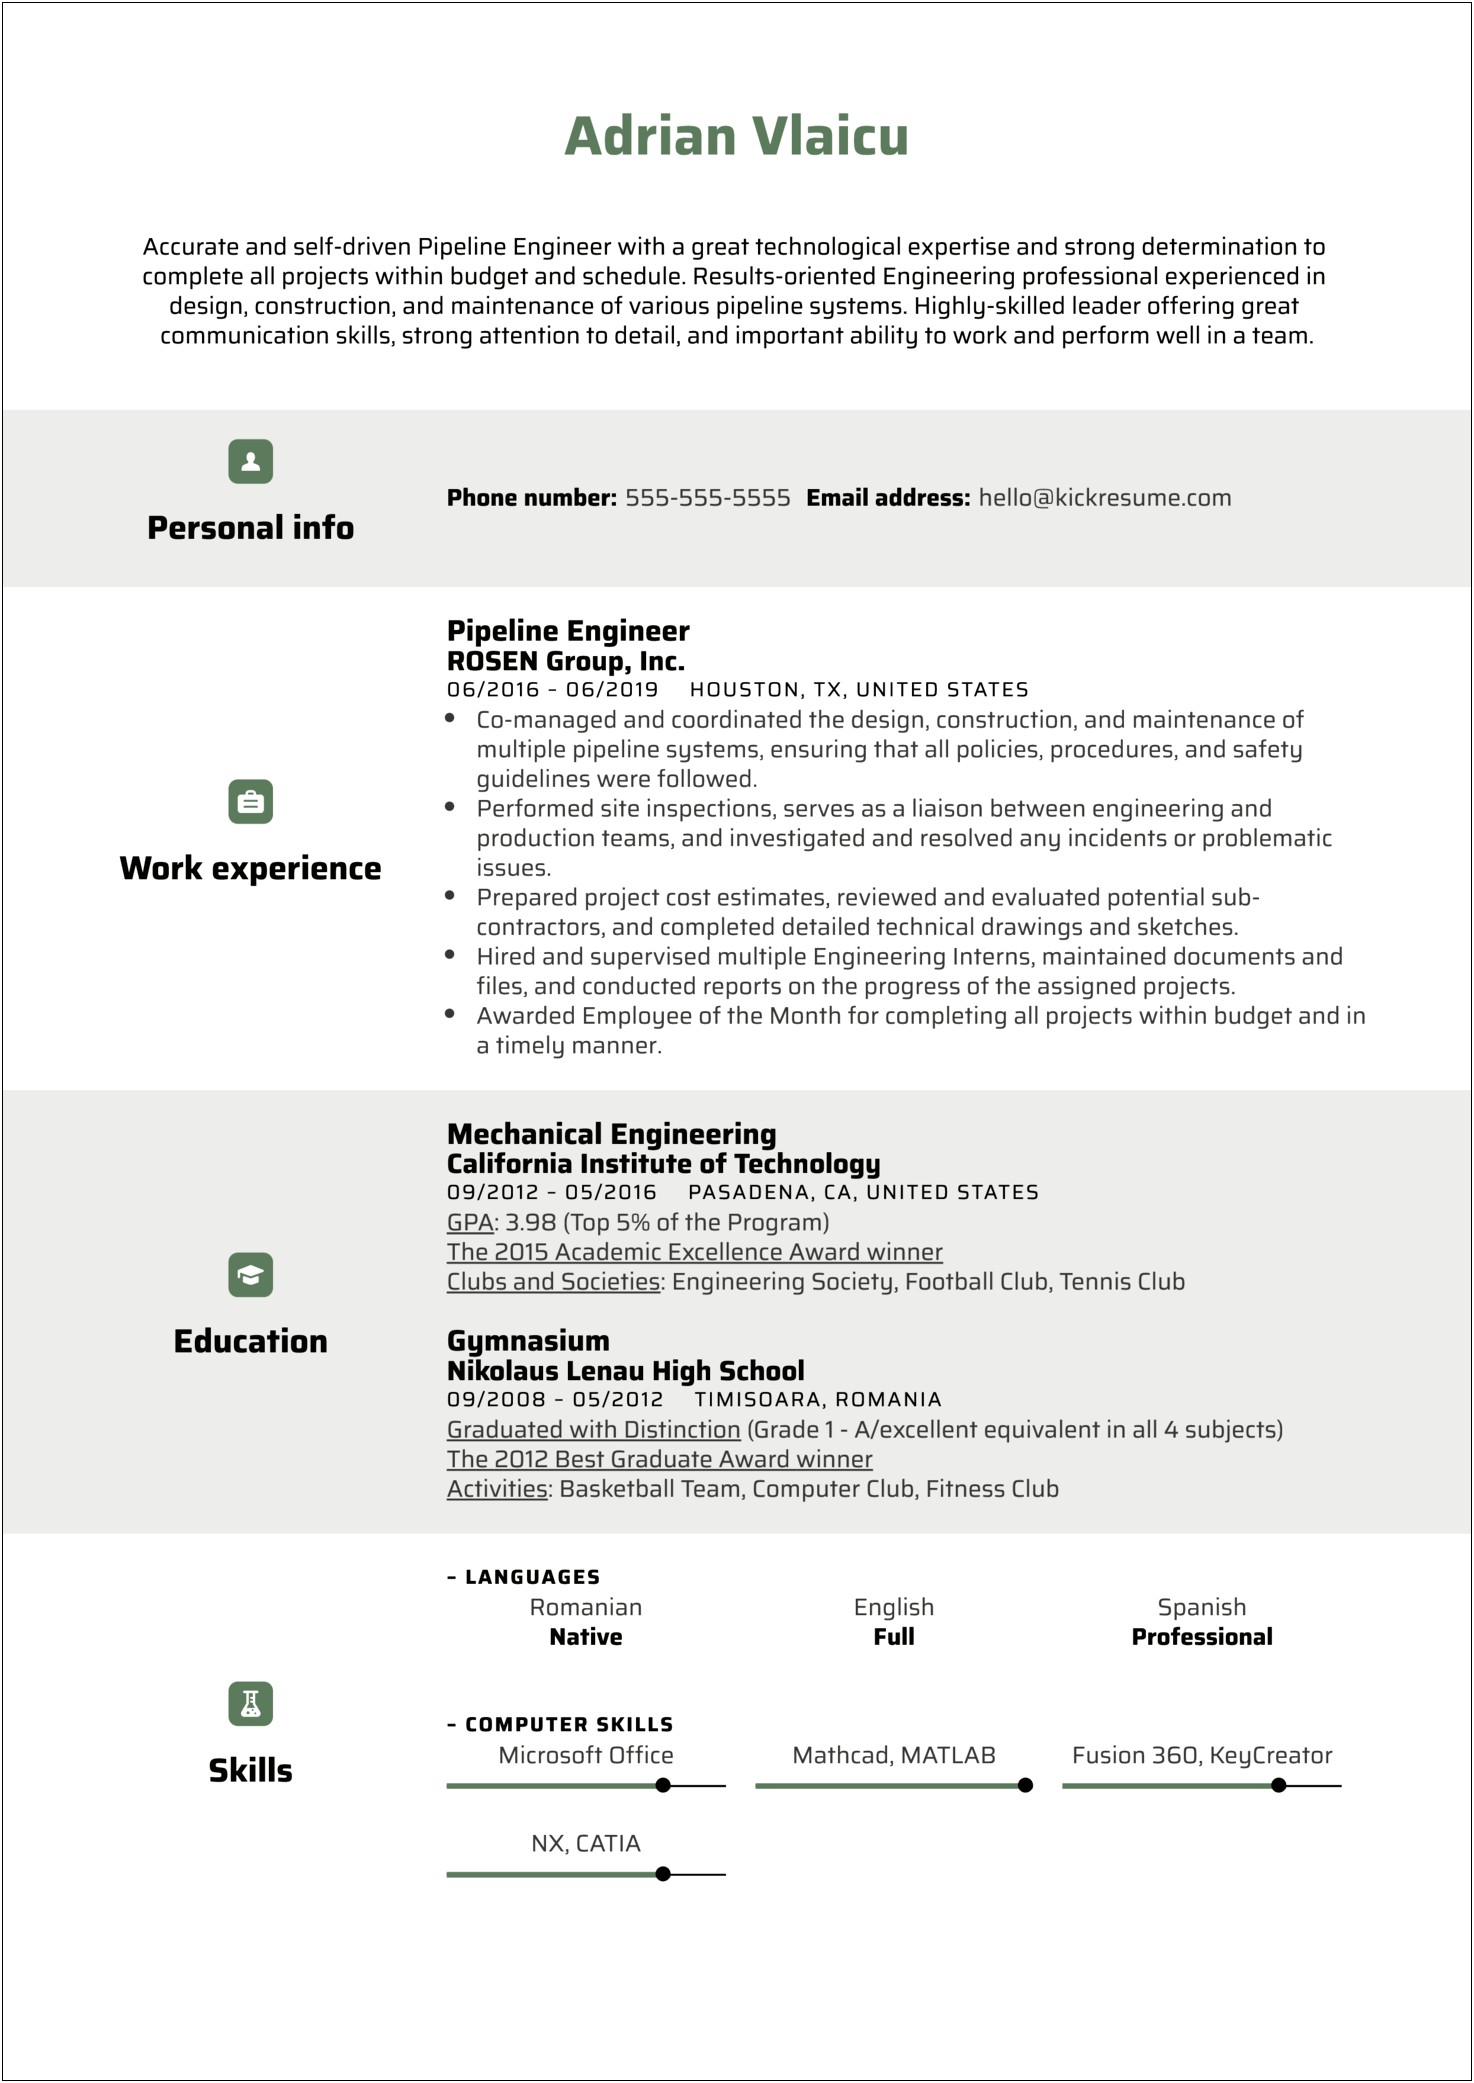 Resume Objective Lines For Engineer